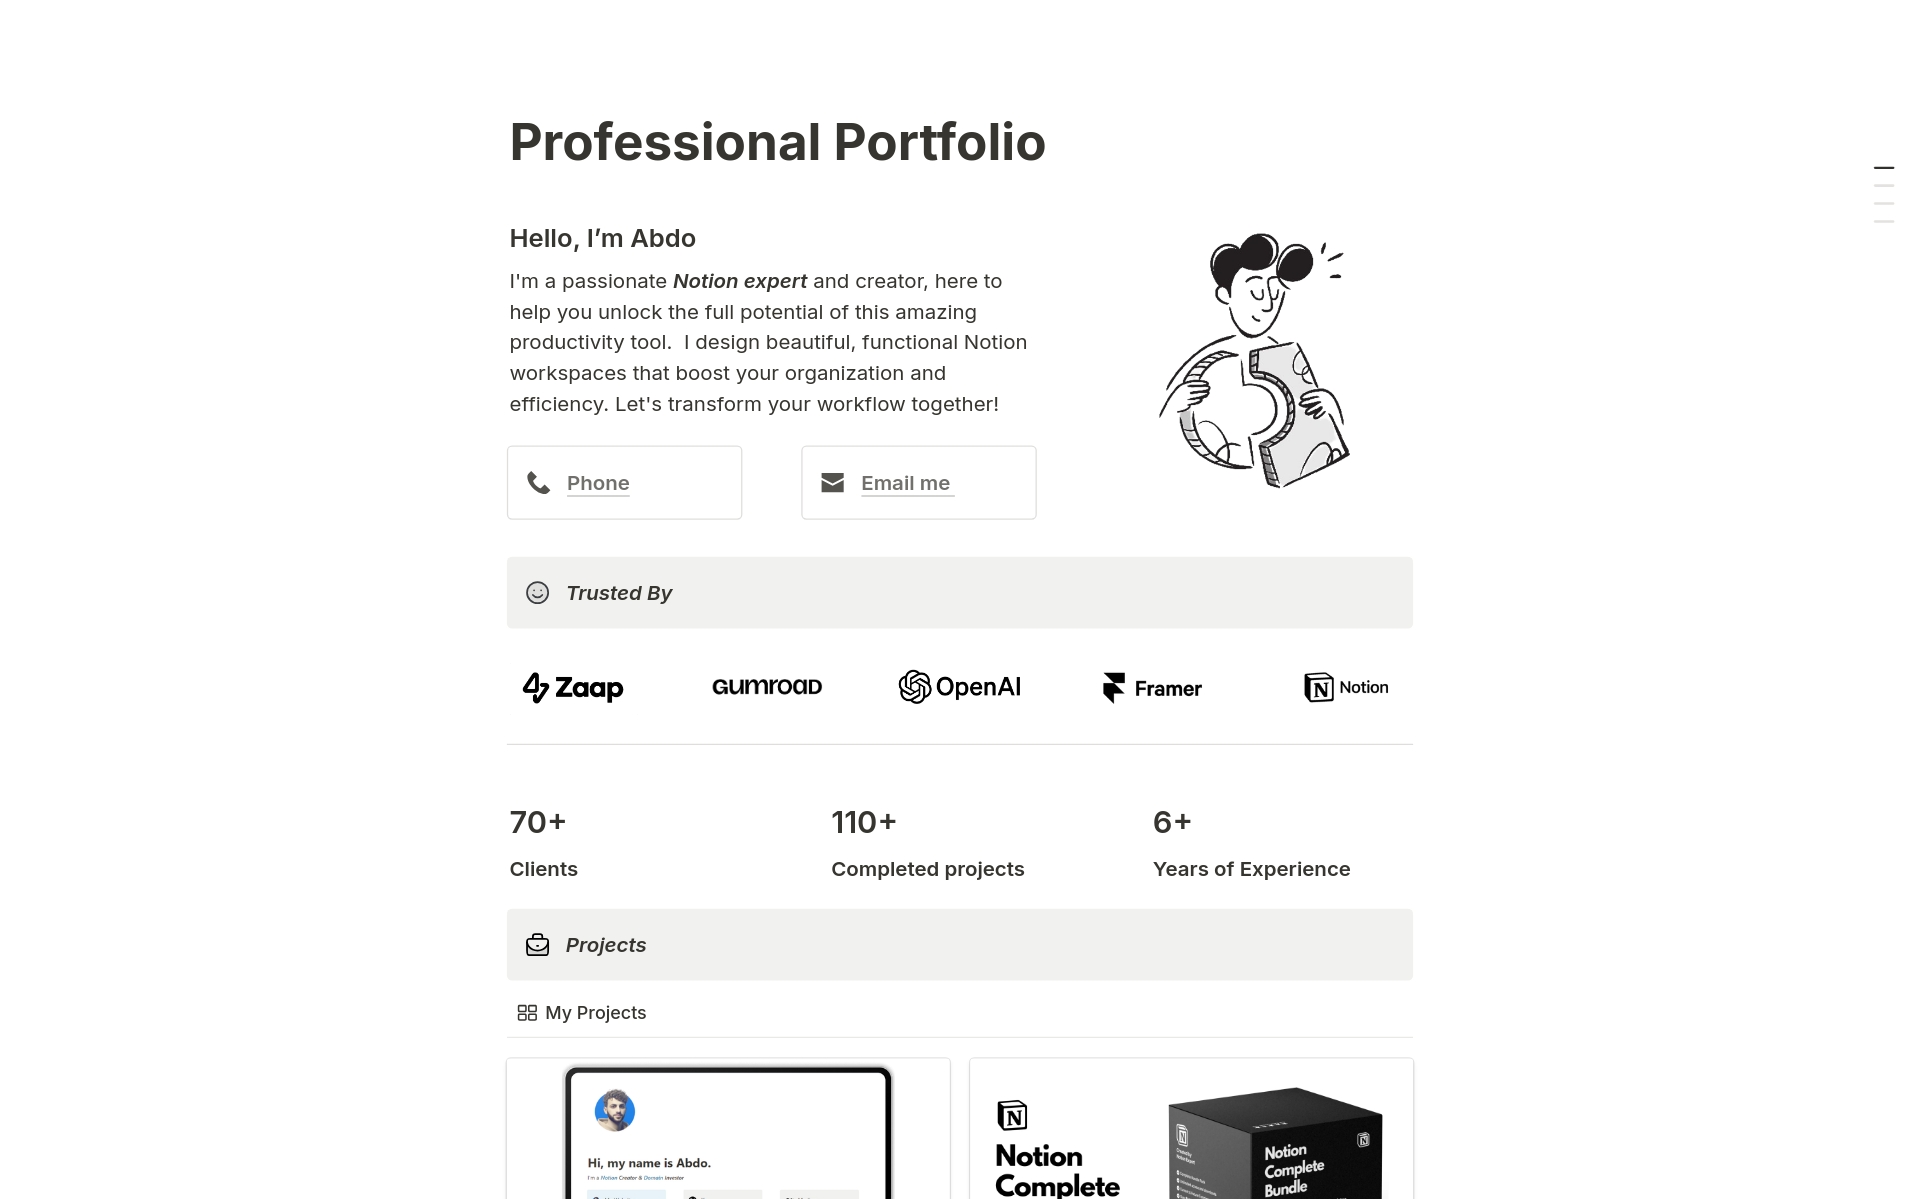 Stand Out with a Professional Portfolio in Notion

Build Your Dream Portfolio: Easy & Free with This Customizable Notion Template